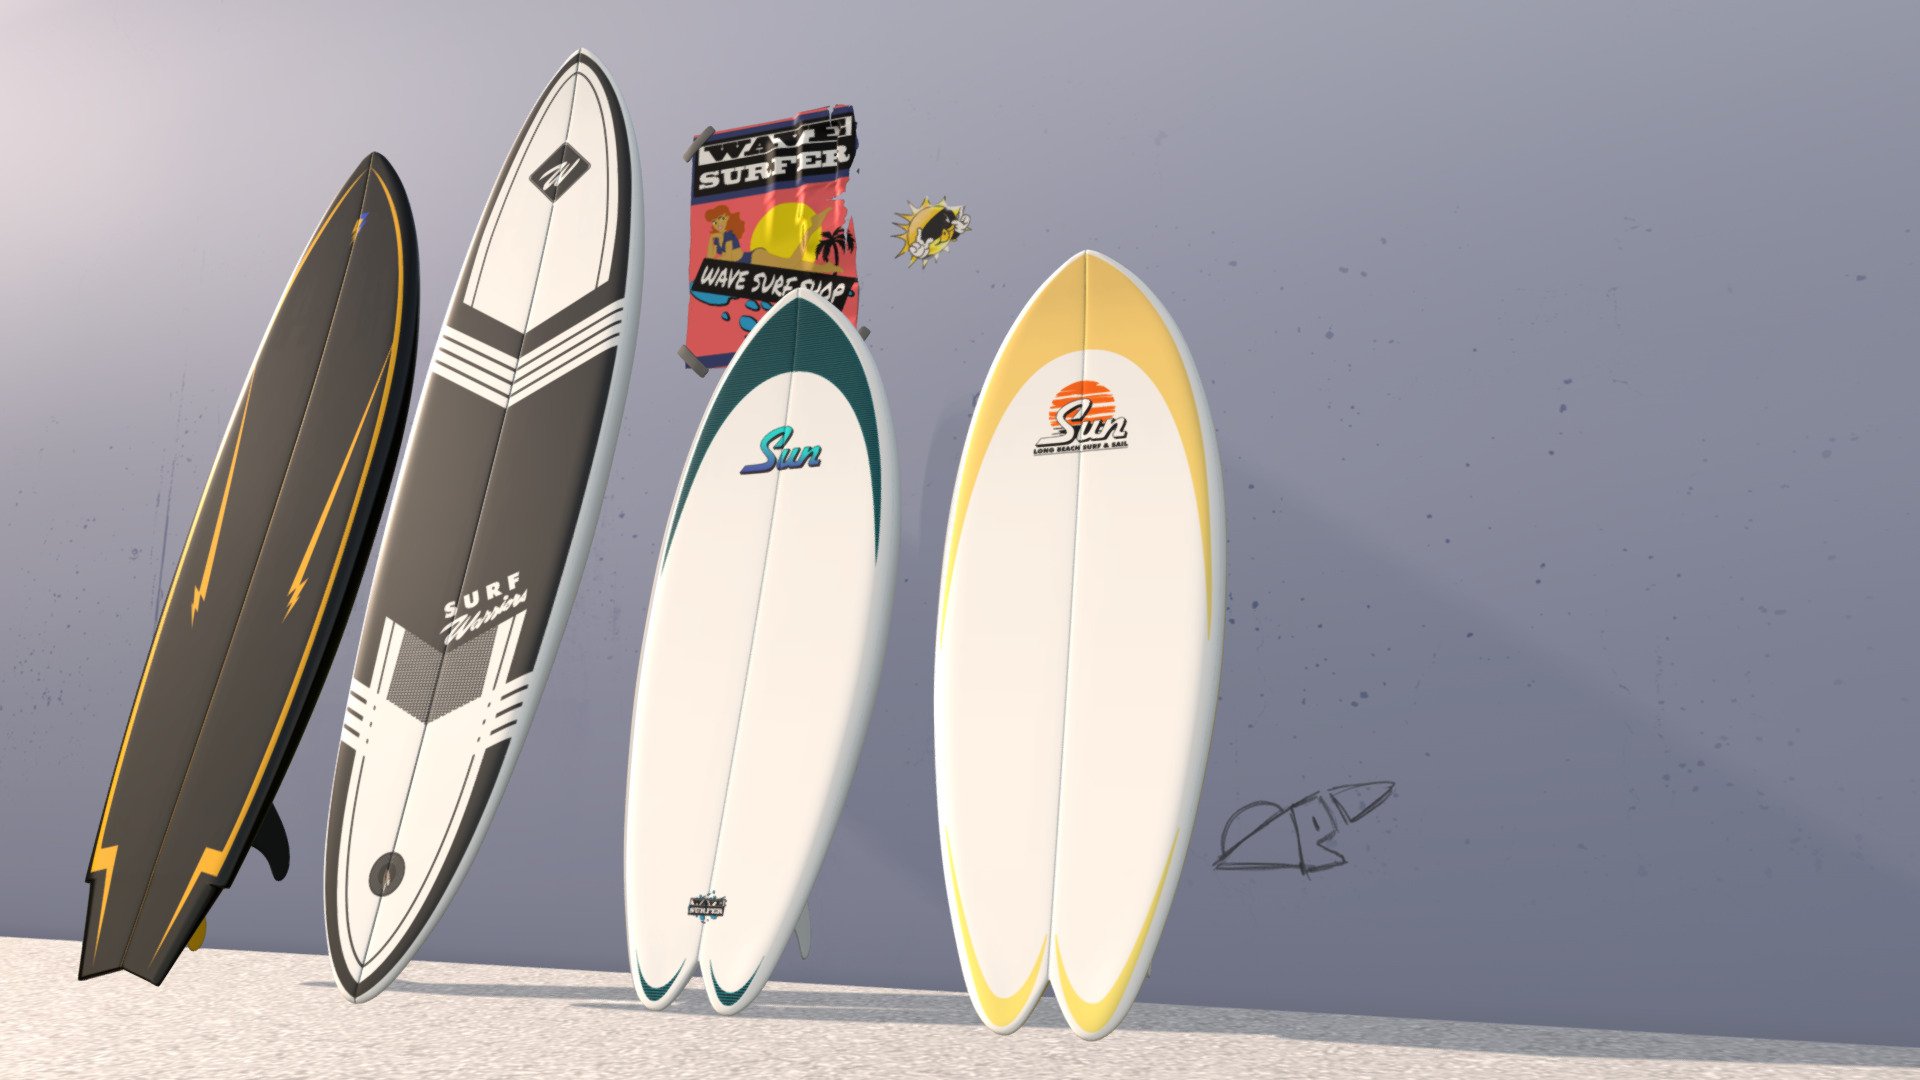 3D Surfboards
Modeled in Cinema 4D with baked textures available as FBX file 3d model